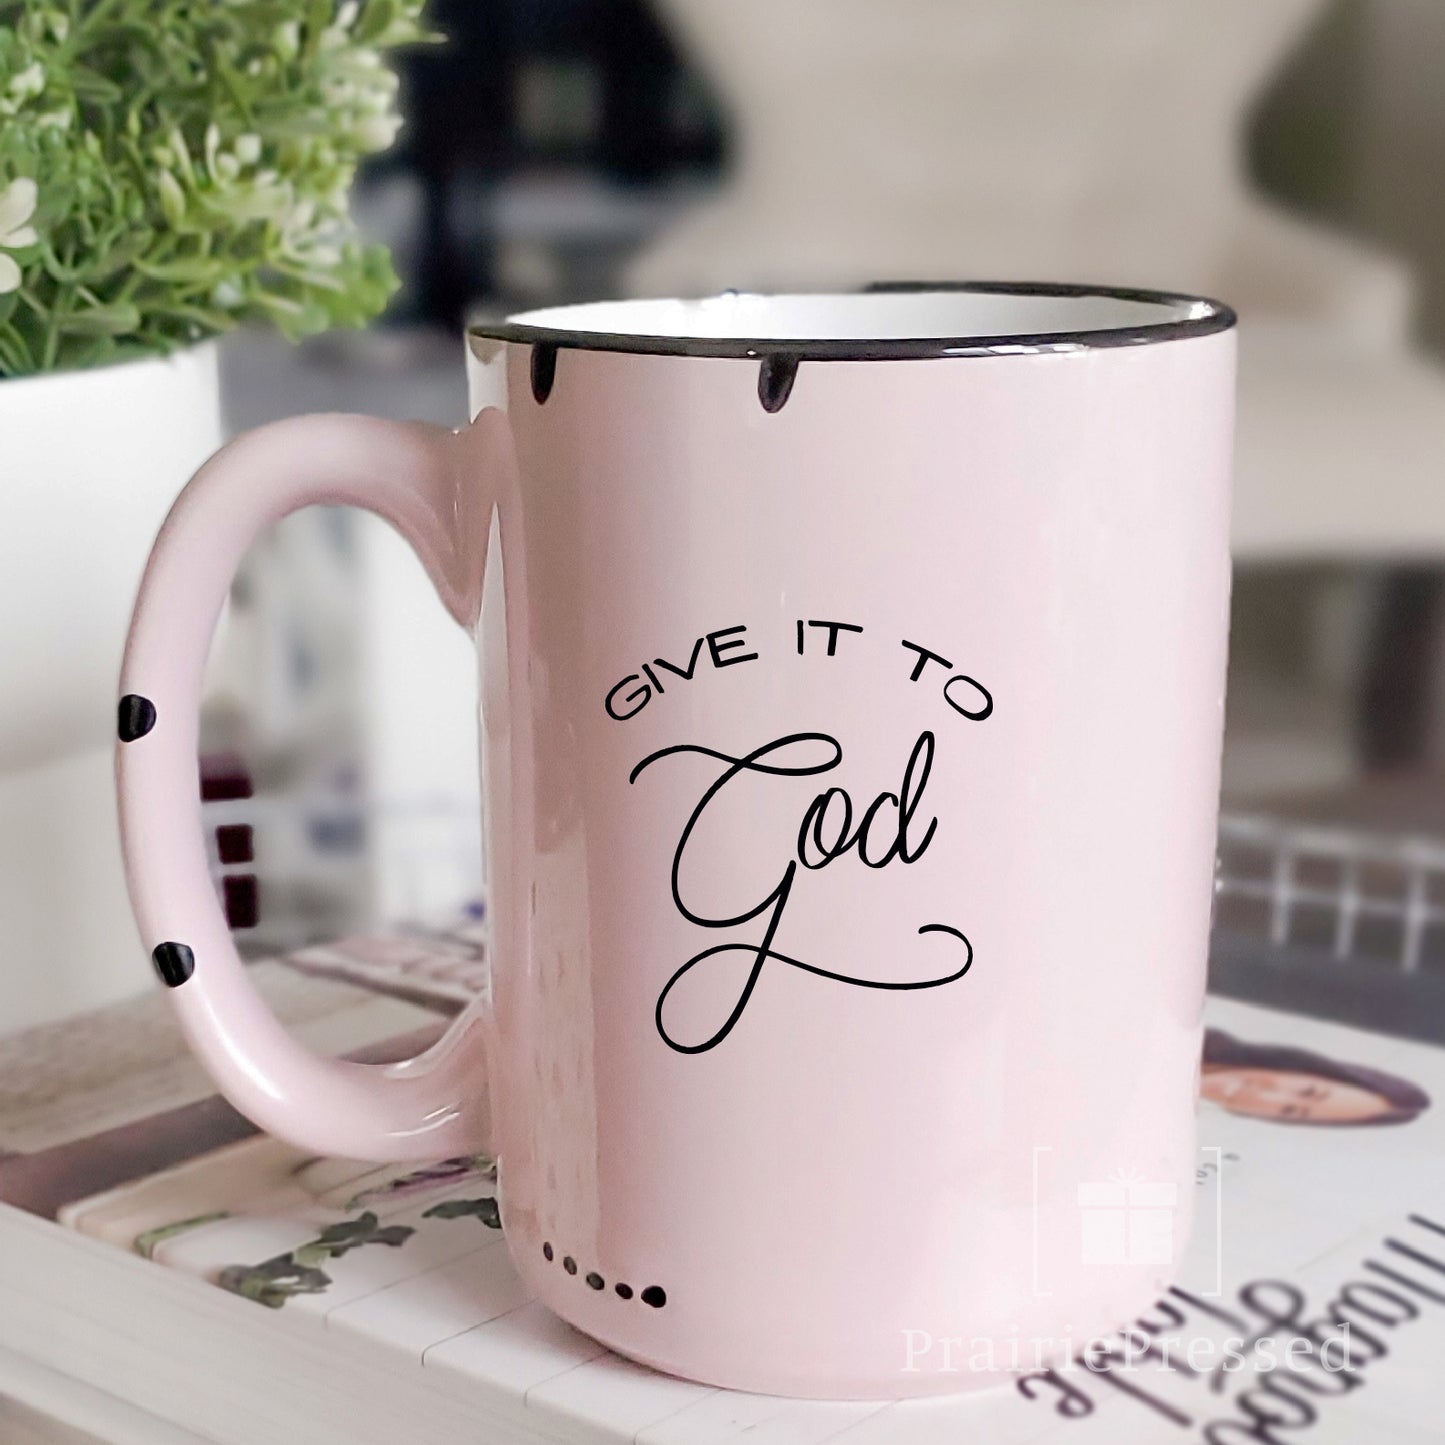 Give it to God Rustic Chipped Ceramic Mug